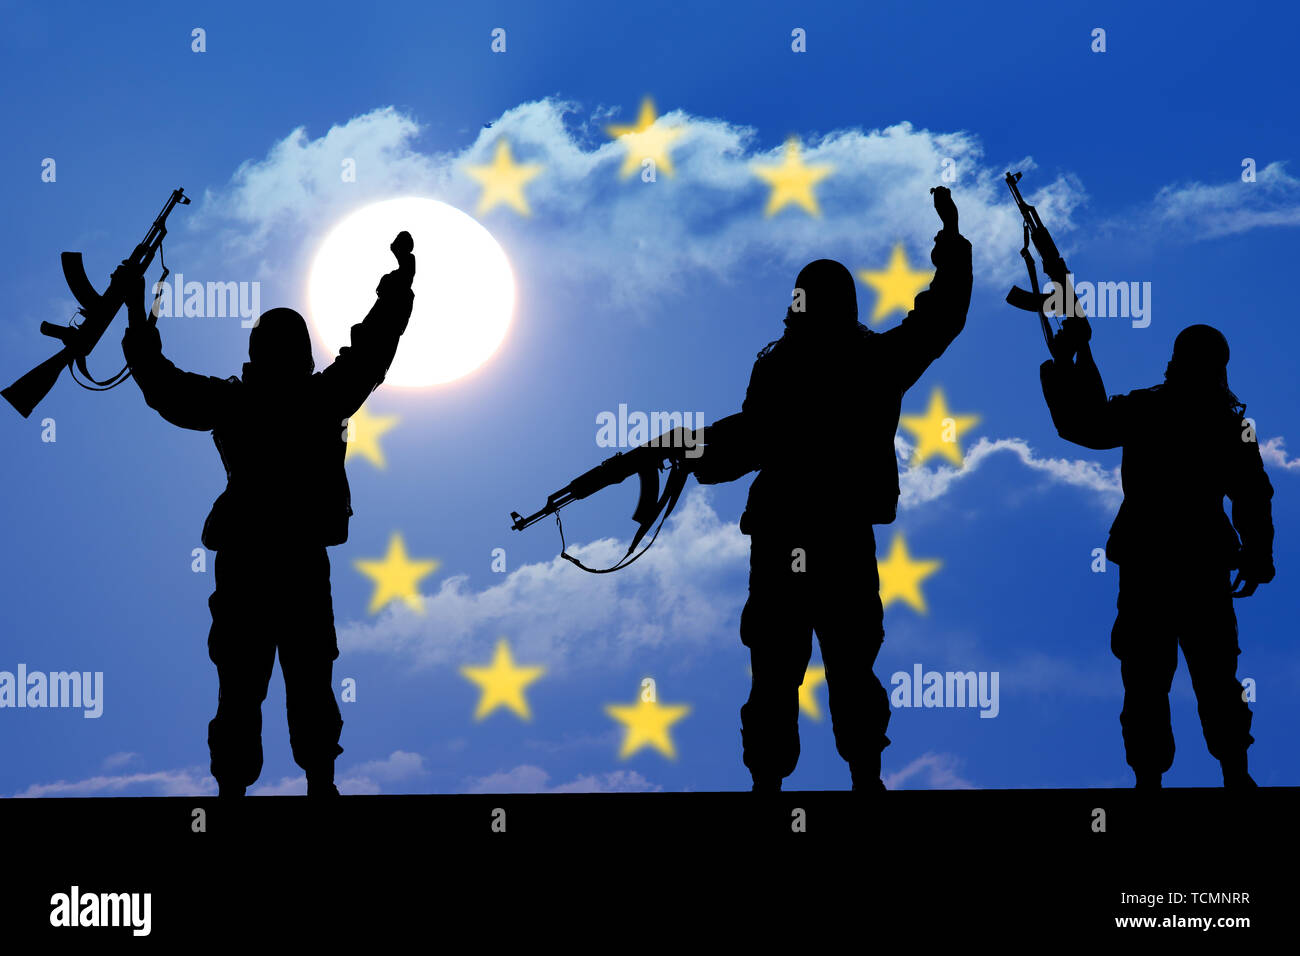 Silhouette of soldier with weapons at sunset. holding gun. Concept of a terrorist. Silhouette terrorists, national flag on background - European Union Stock Photo